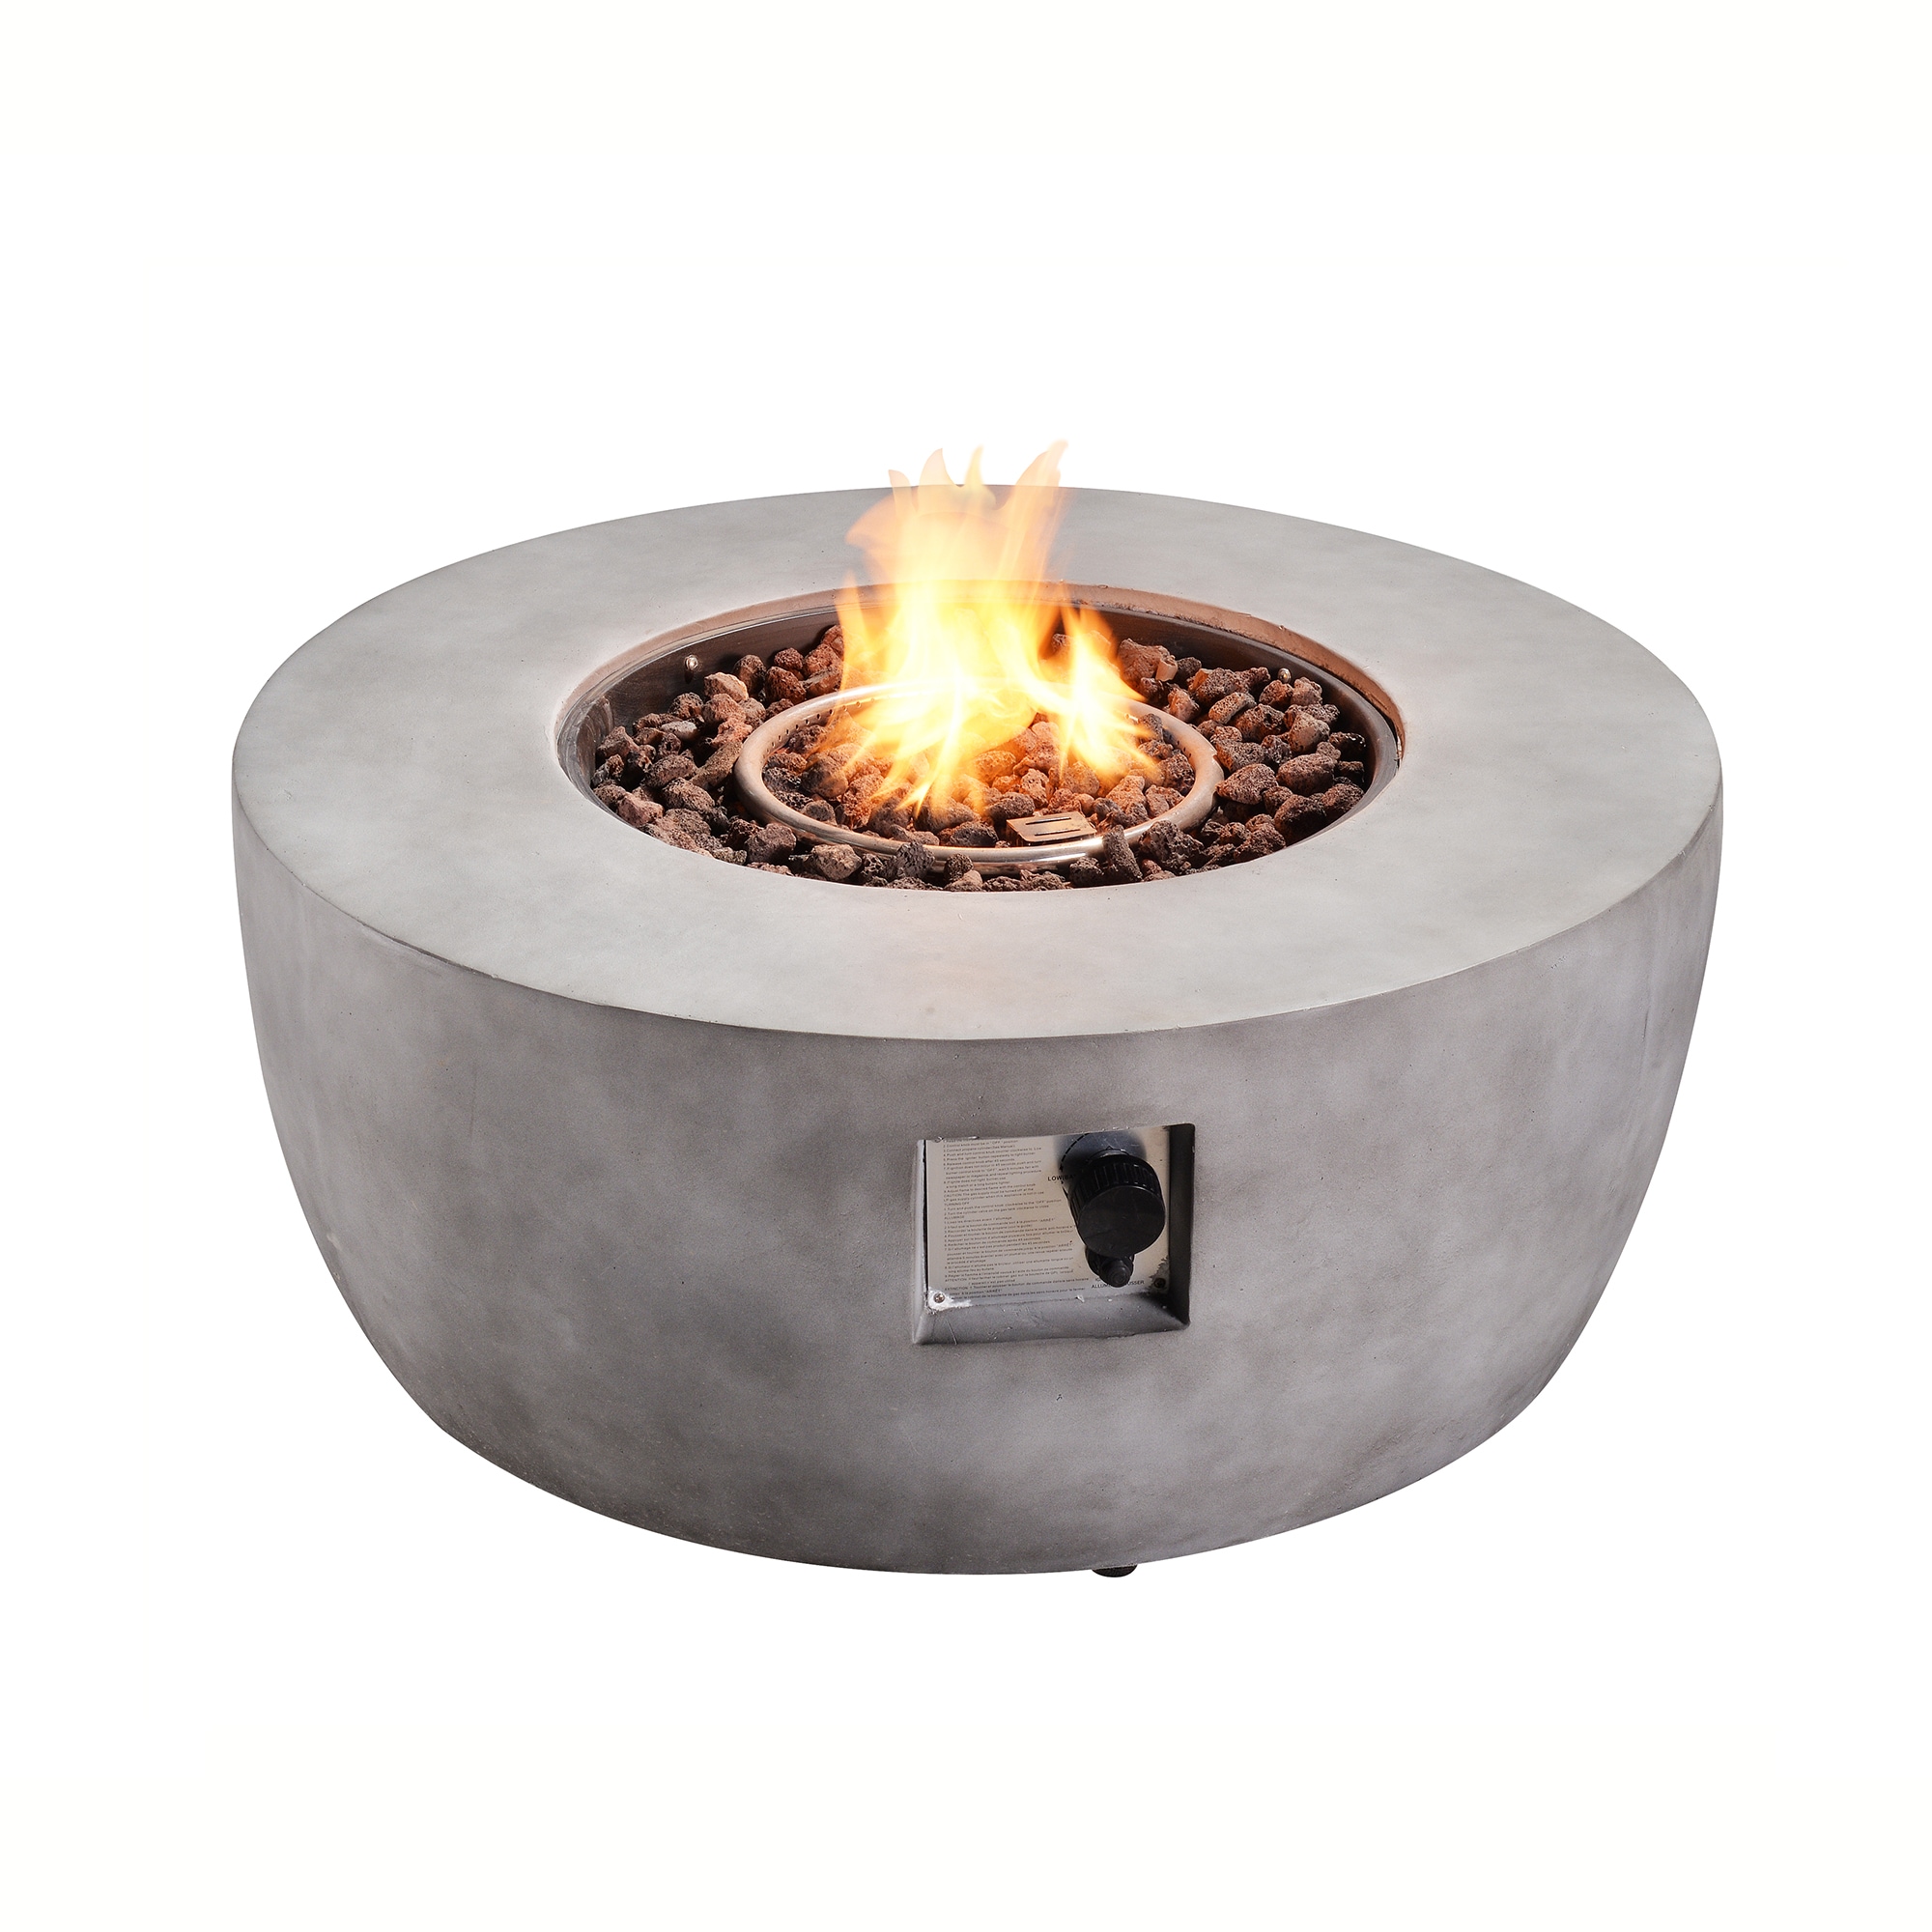 Concrete Propane Gas Fire Pit, Round Fire Pit With Propane Tank Inside